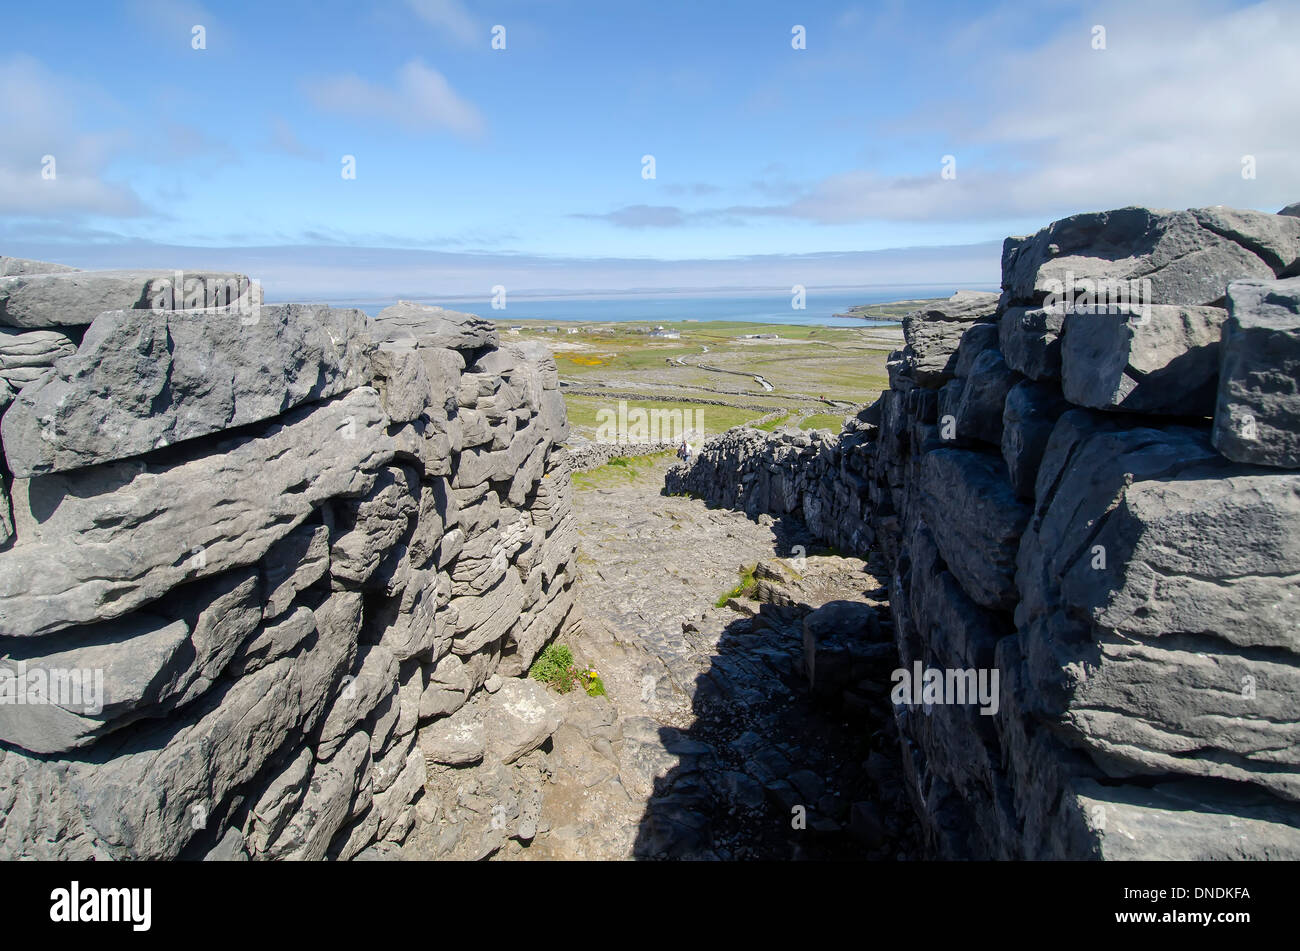 Entrance to Dun Aengus Bronze Age stone fort on Inishmore, Aran Islands, County Galway, Ireland. Stock Photo